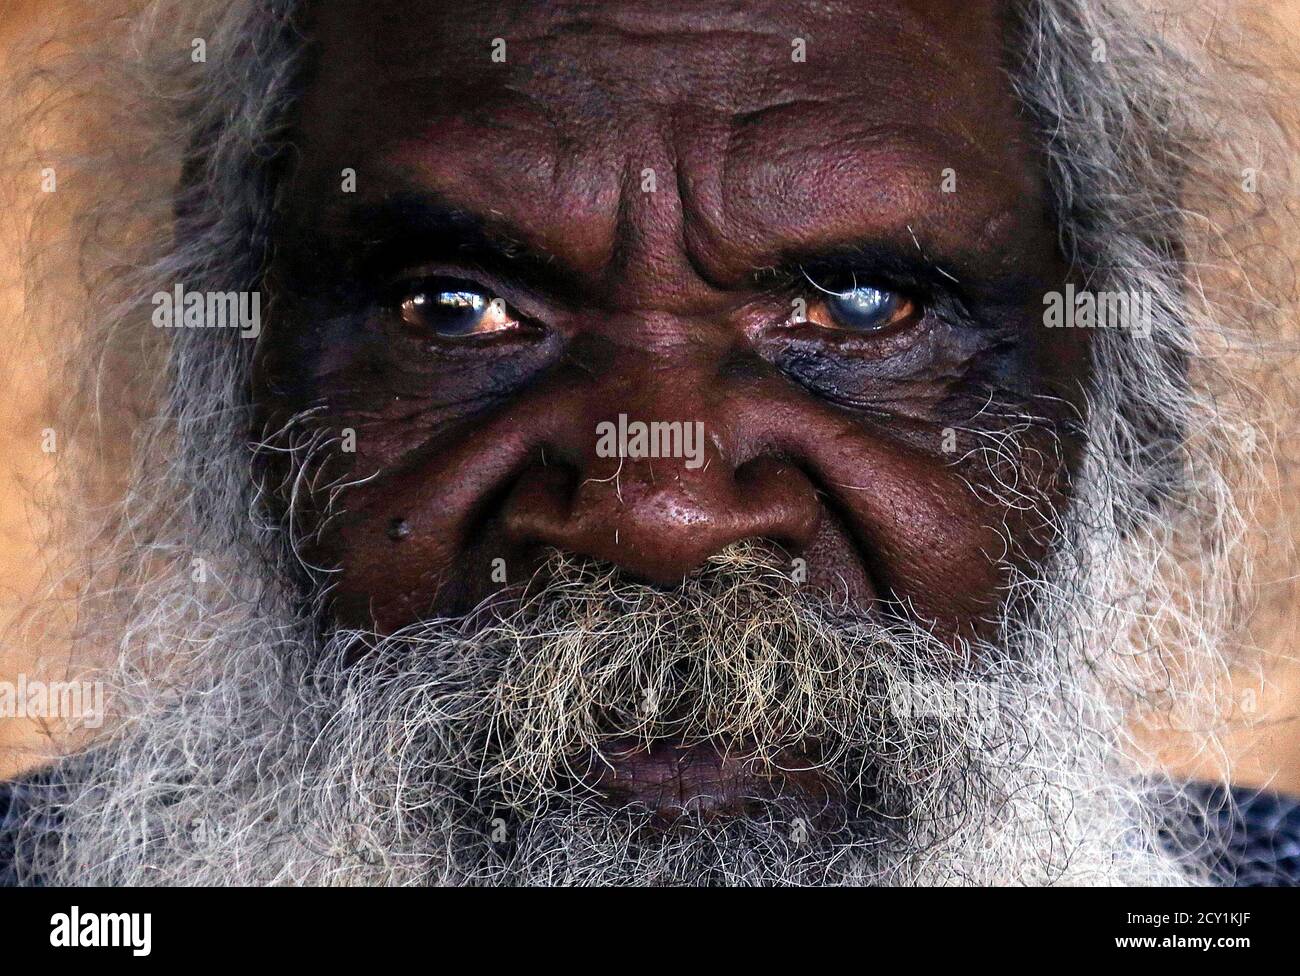 Seventy-six-year-old Australian Aboriginal elder Jimmy Burnyila of the  Yolngu people sits at his house located on the outskirts of the community  of Ramingining located in East Arnhem Land November 21, 2014. The